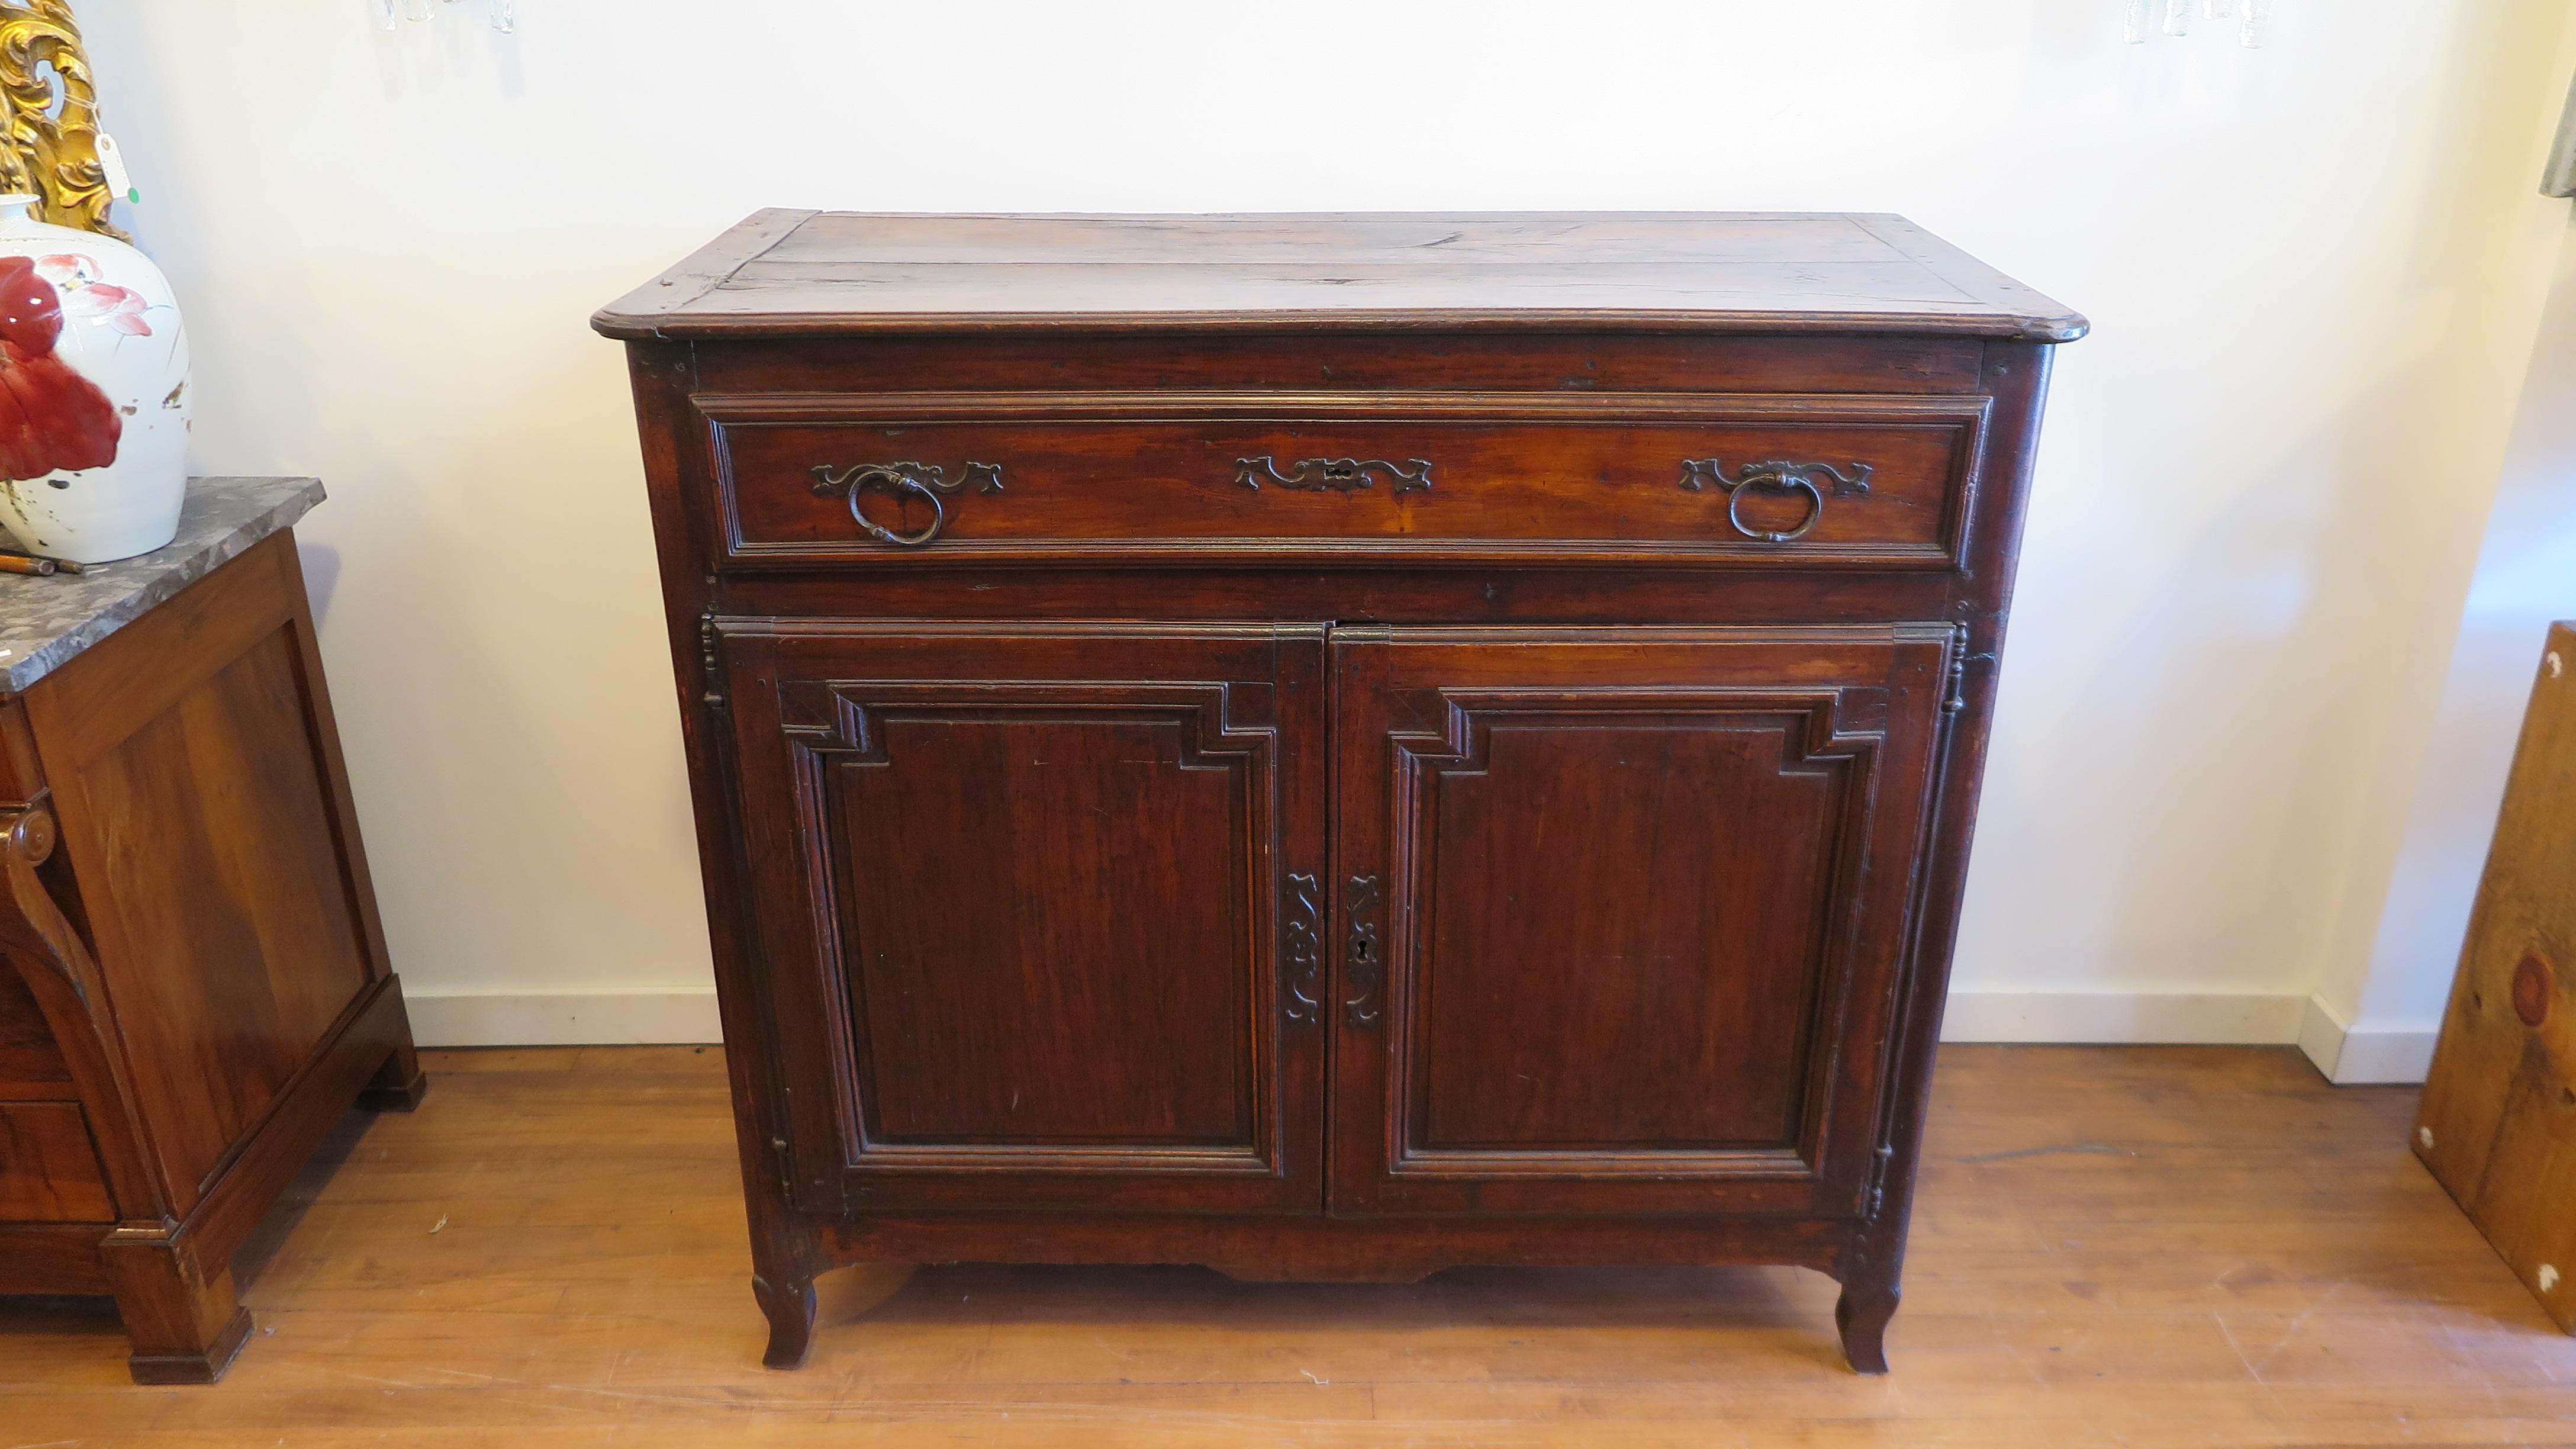 Early 19th century French sideboard. Solid oak tall chest buffet sideboard cabinet. Rich patina to the wood, top having separation in the seam and various indentations. In overall good condition. Top shows 200 years of use well. Raised molding